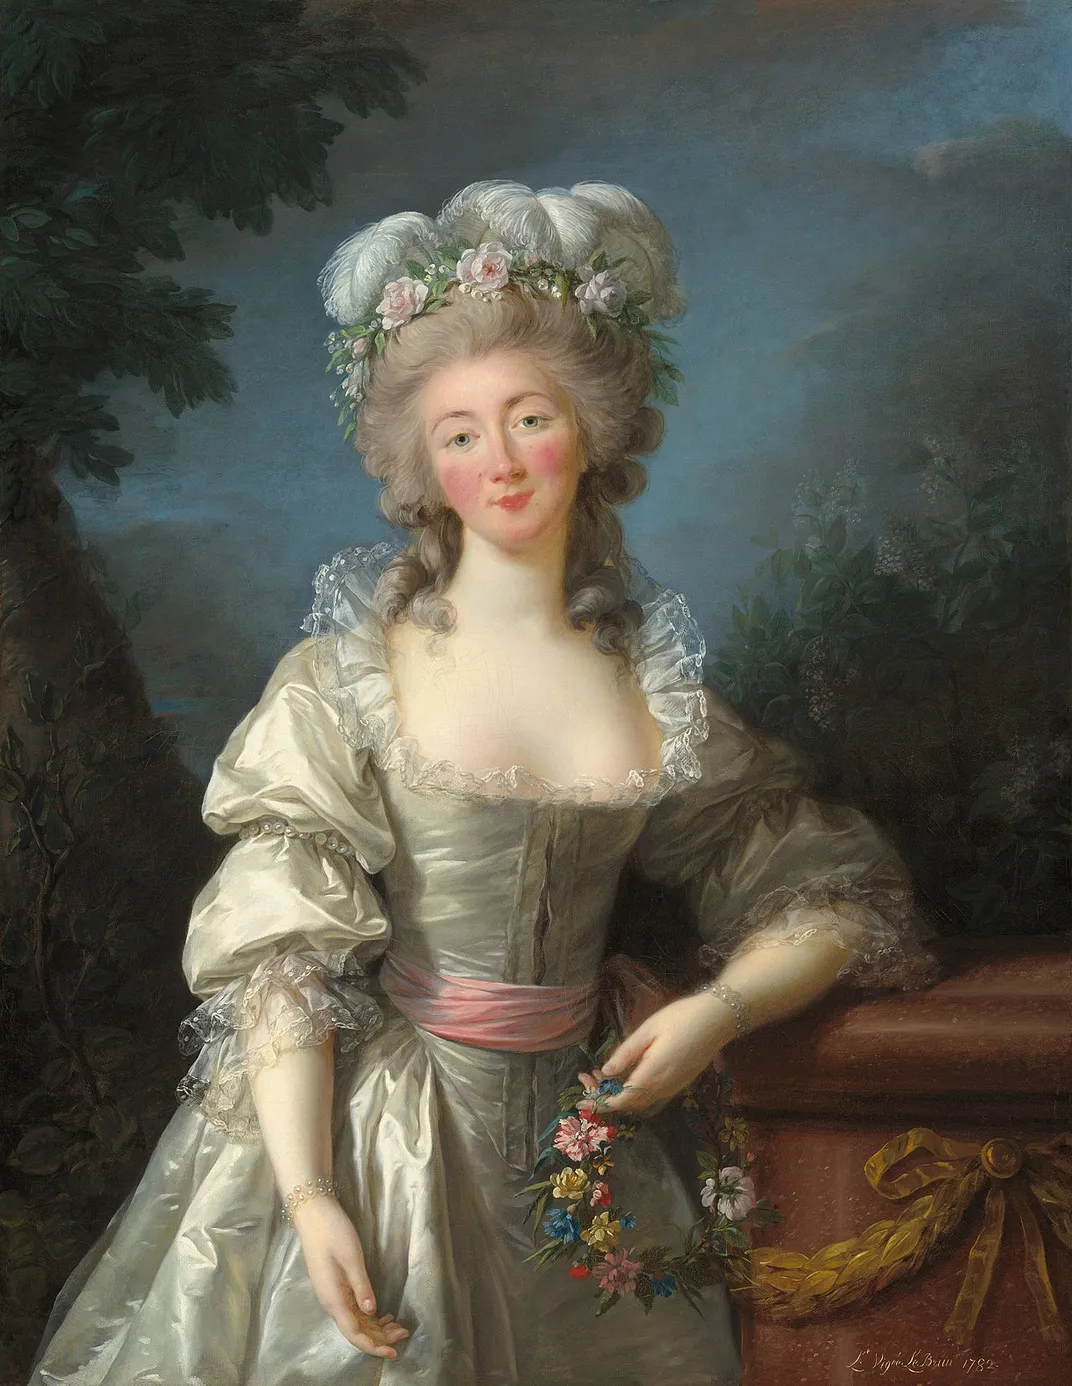 Madame du Barry, chief mistress to Louis XV